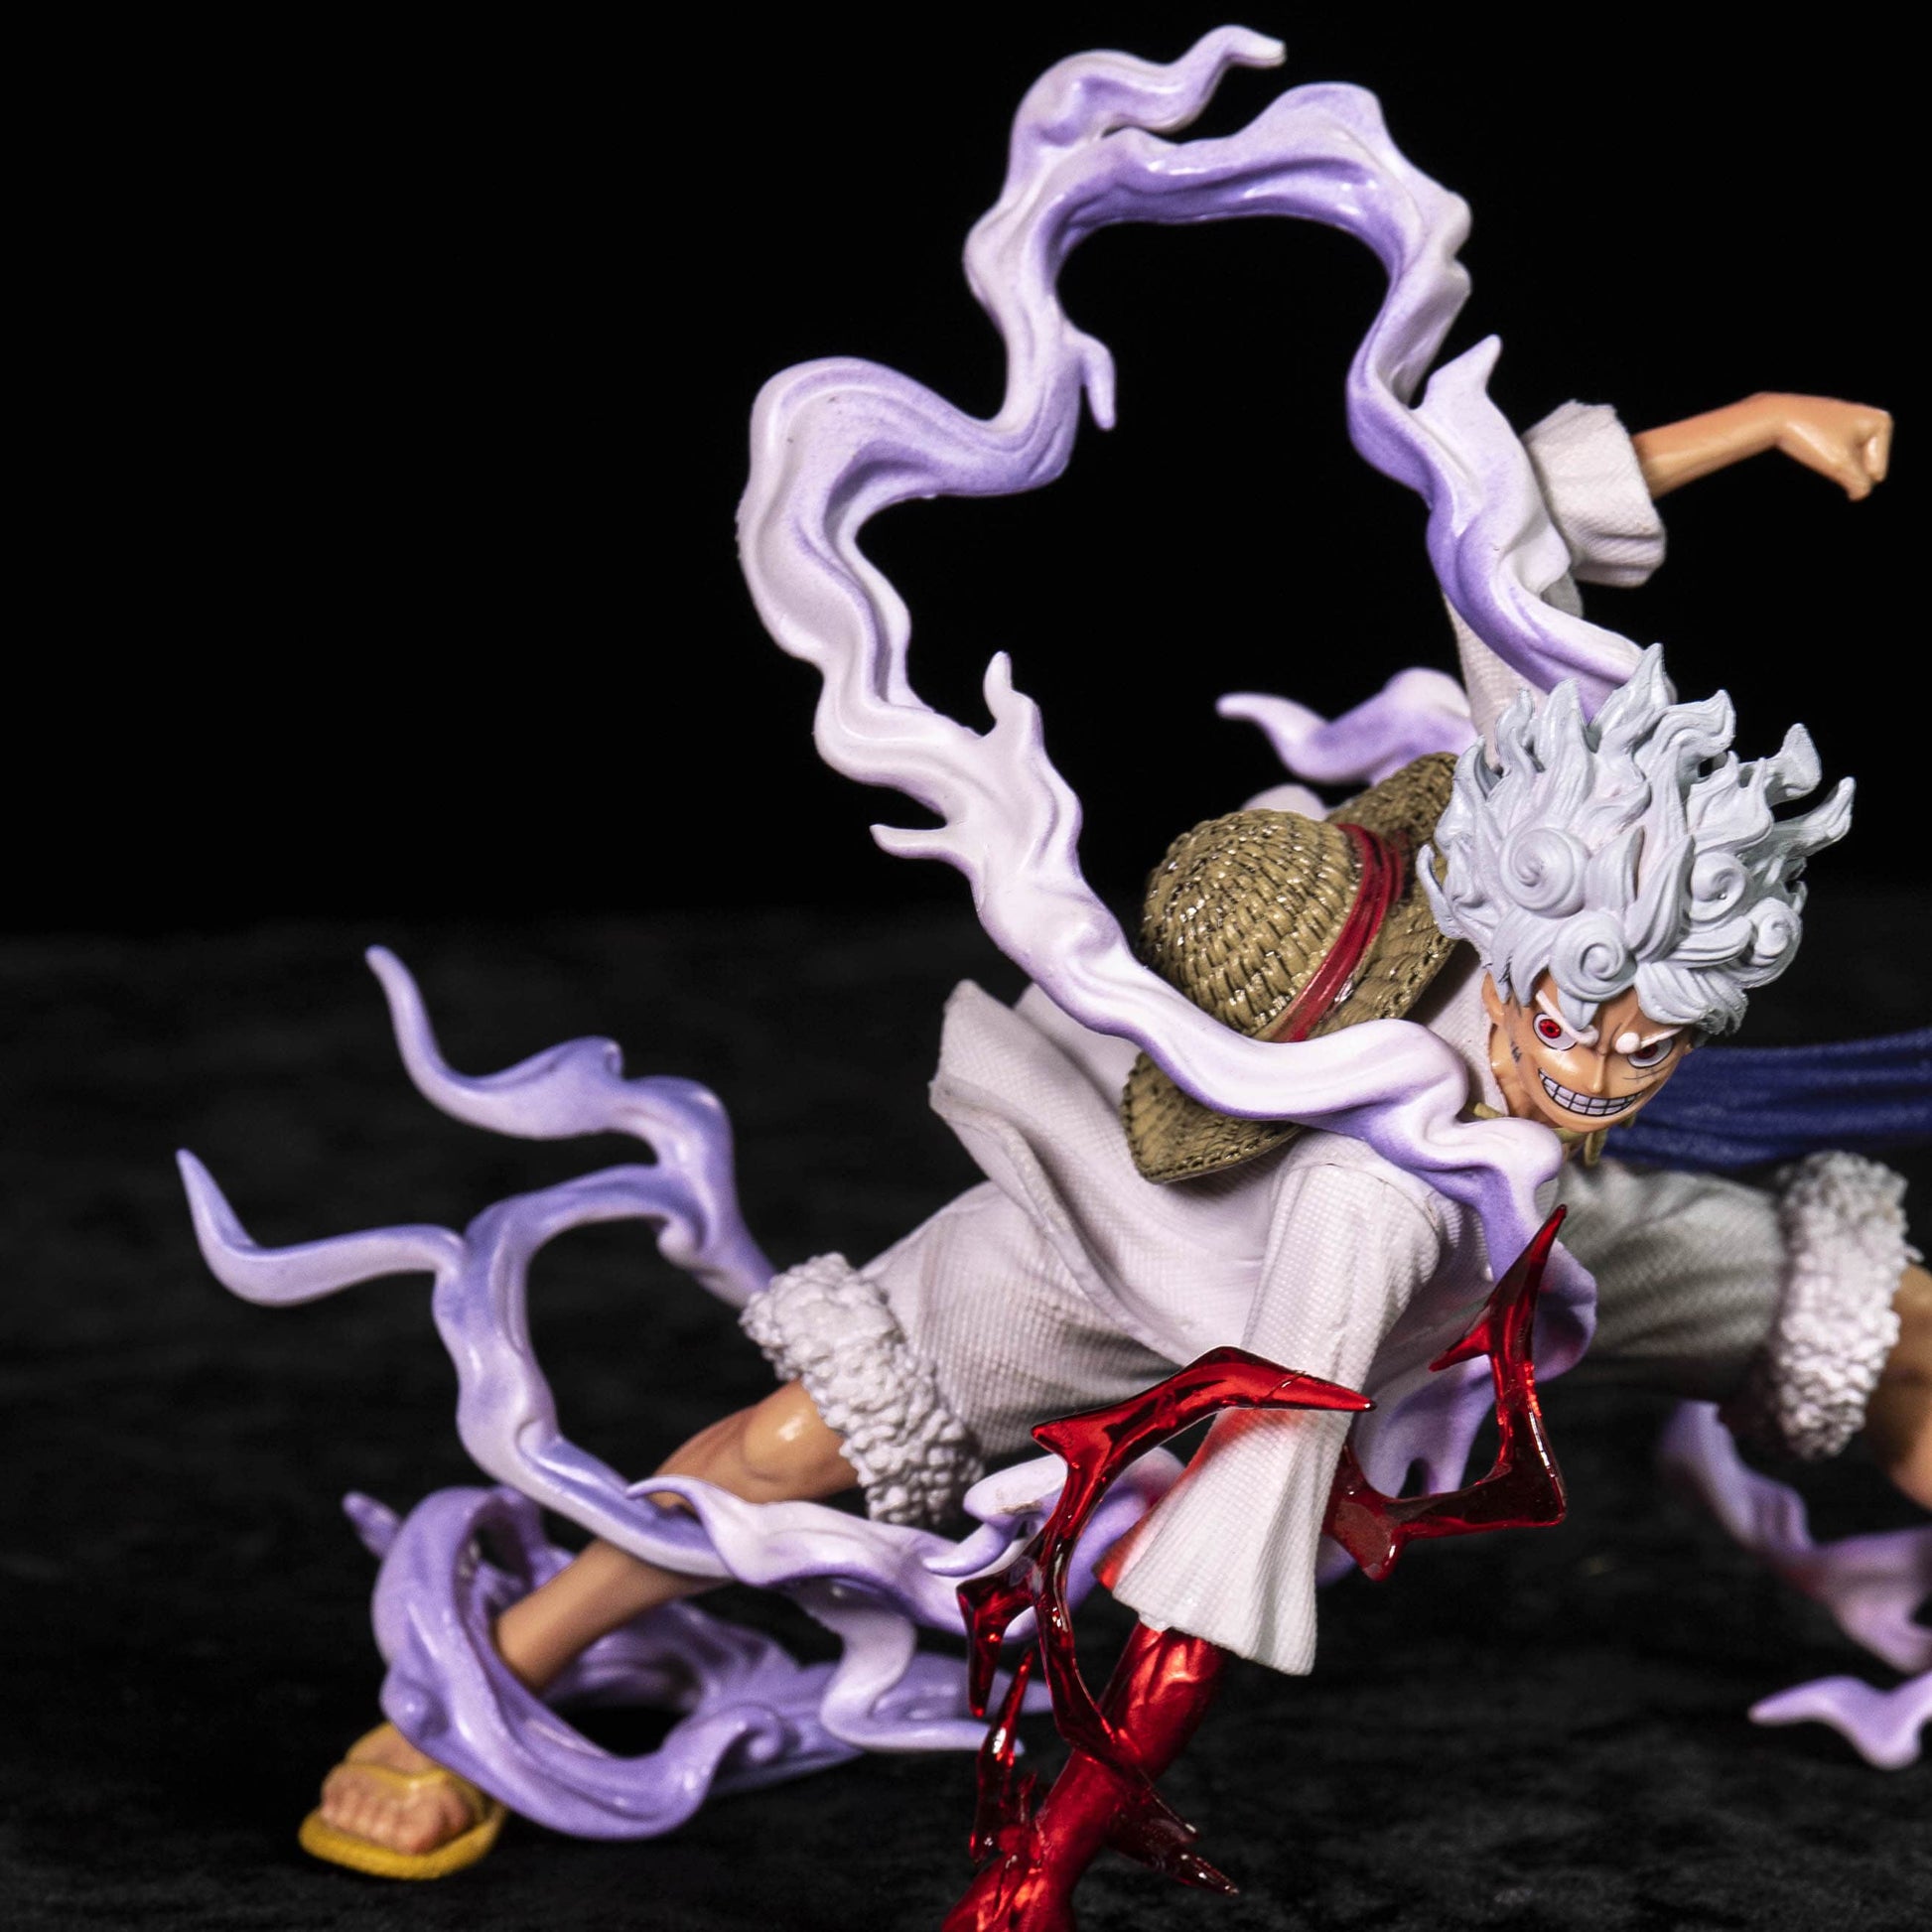 OnePiece Punching Luffy Anime Statue Pic 6